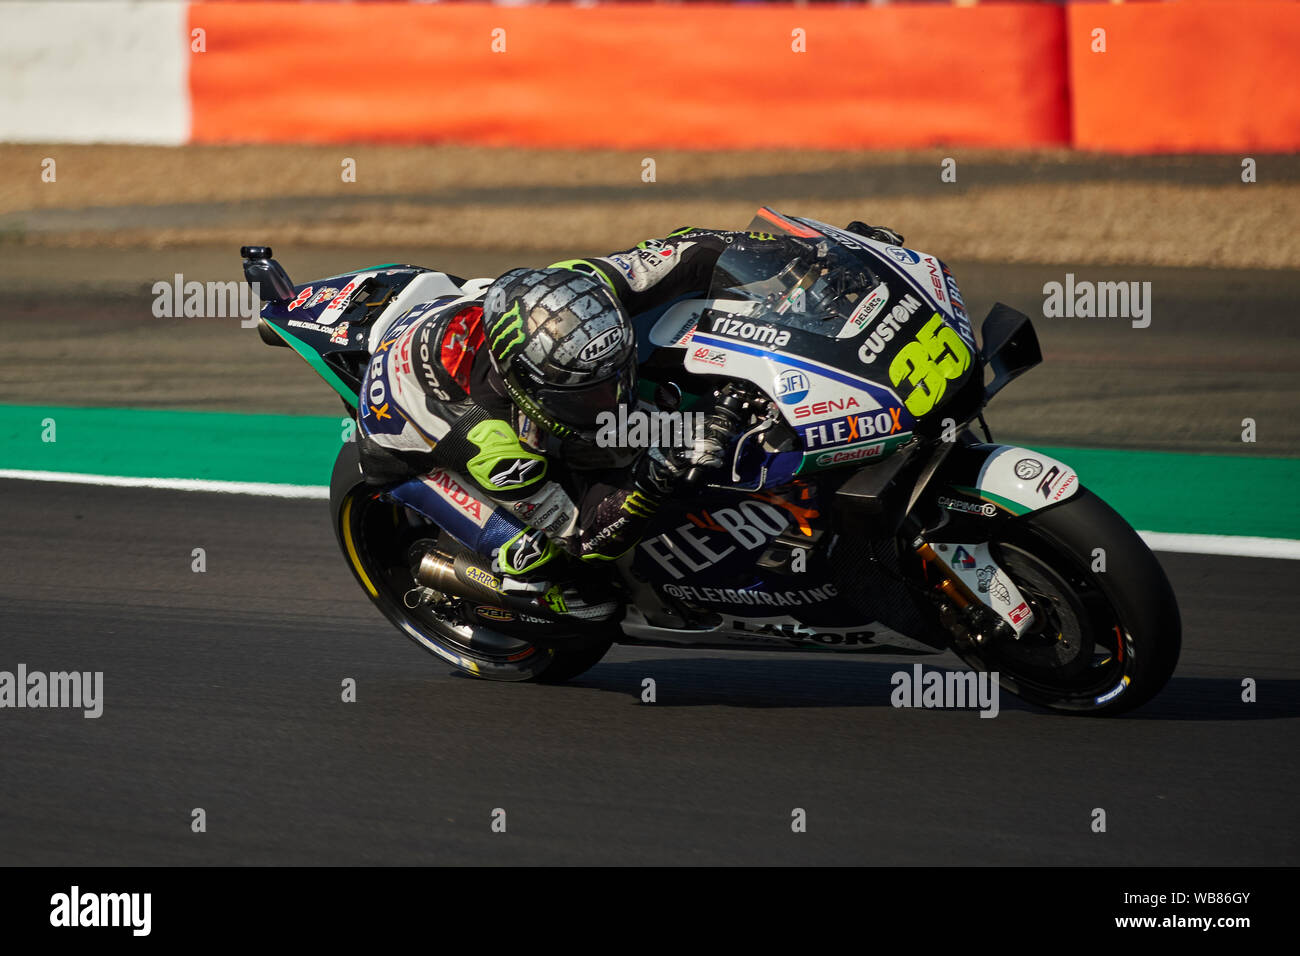 Towcester, Northamptonshire, UK. 25th Aug, 2019. Cal Crutchlow (GBR) and LCR Honda CASTROL during the 2019 GoPro British Grand Prix Moto GP at Silverstone Circuit. Credit: Gergo Toth/Alamy Live News Stock Photo